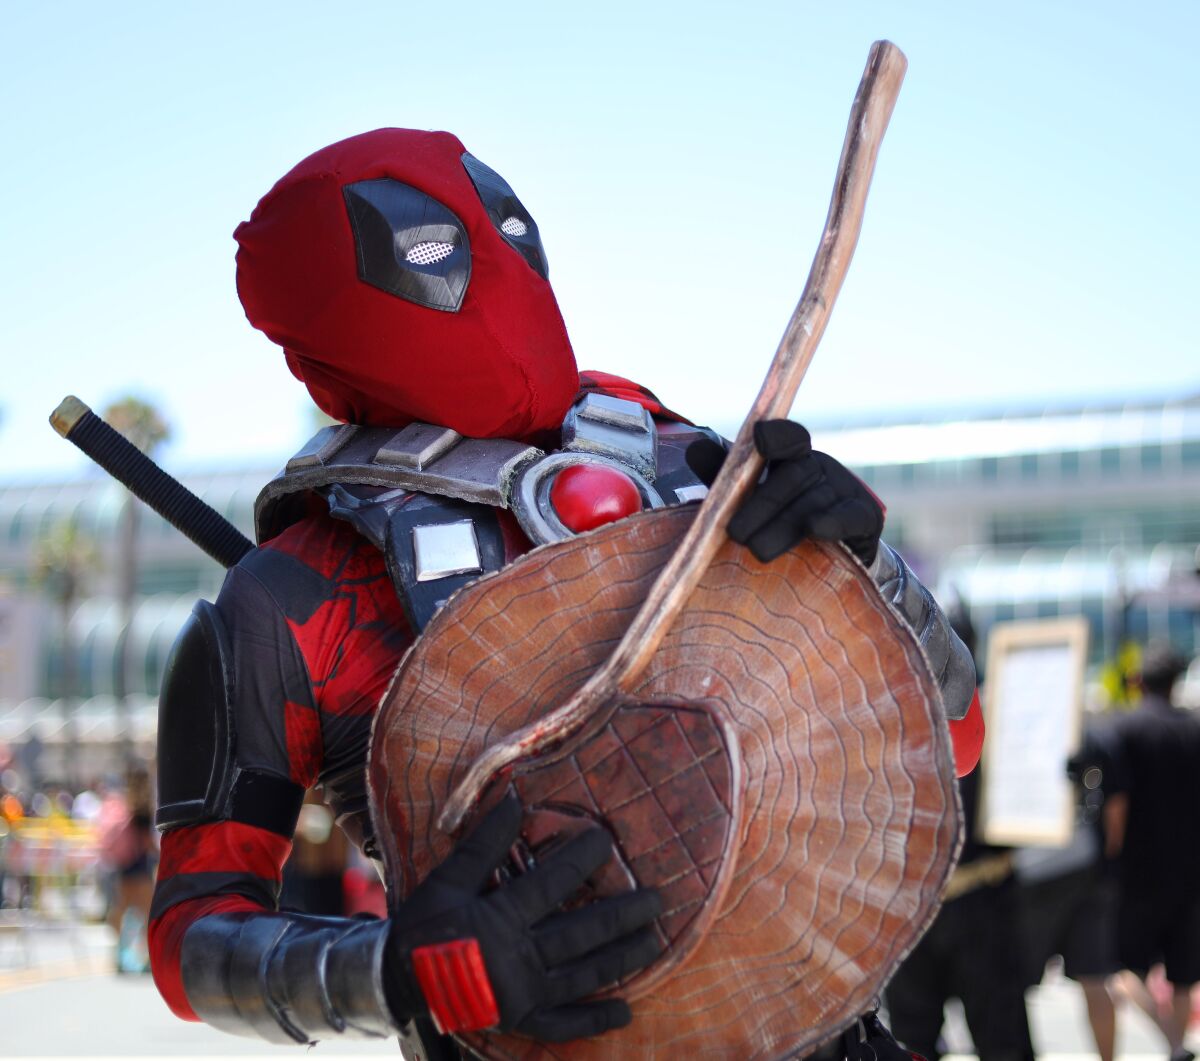 Davit Dent-Taise of Los Angeles dressed as a Scottish Deadpool at Comic-Con International in San Diego on July 19, 2019.